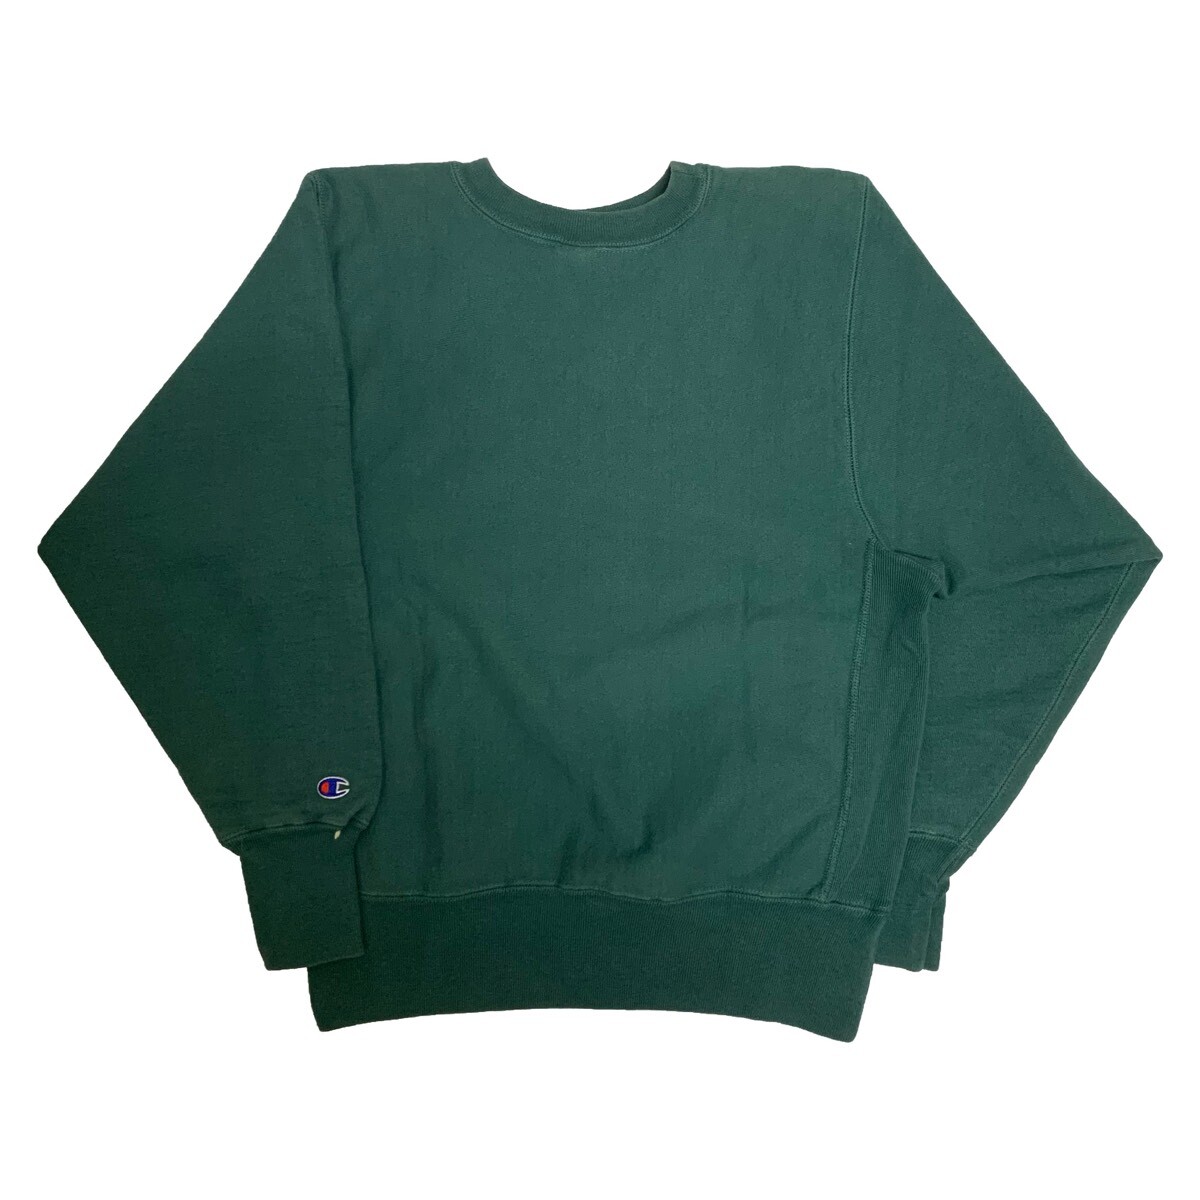 90's CHAMPION REVERSE WEAVE SWEAT SHIRTS DARK GREEN - NOW OR NEVER